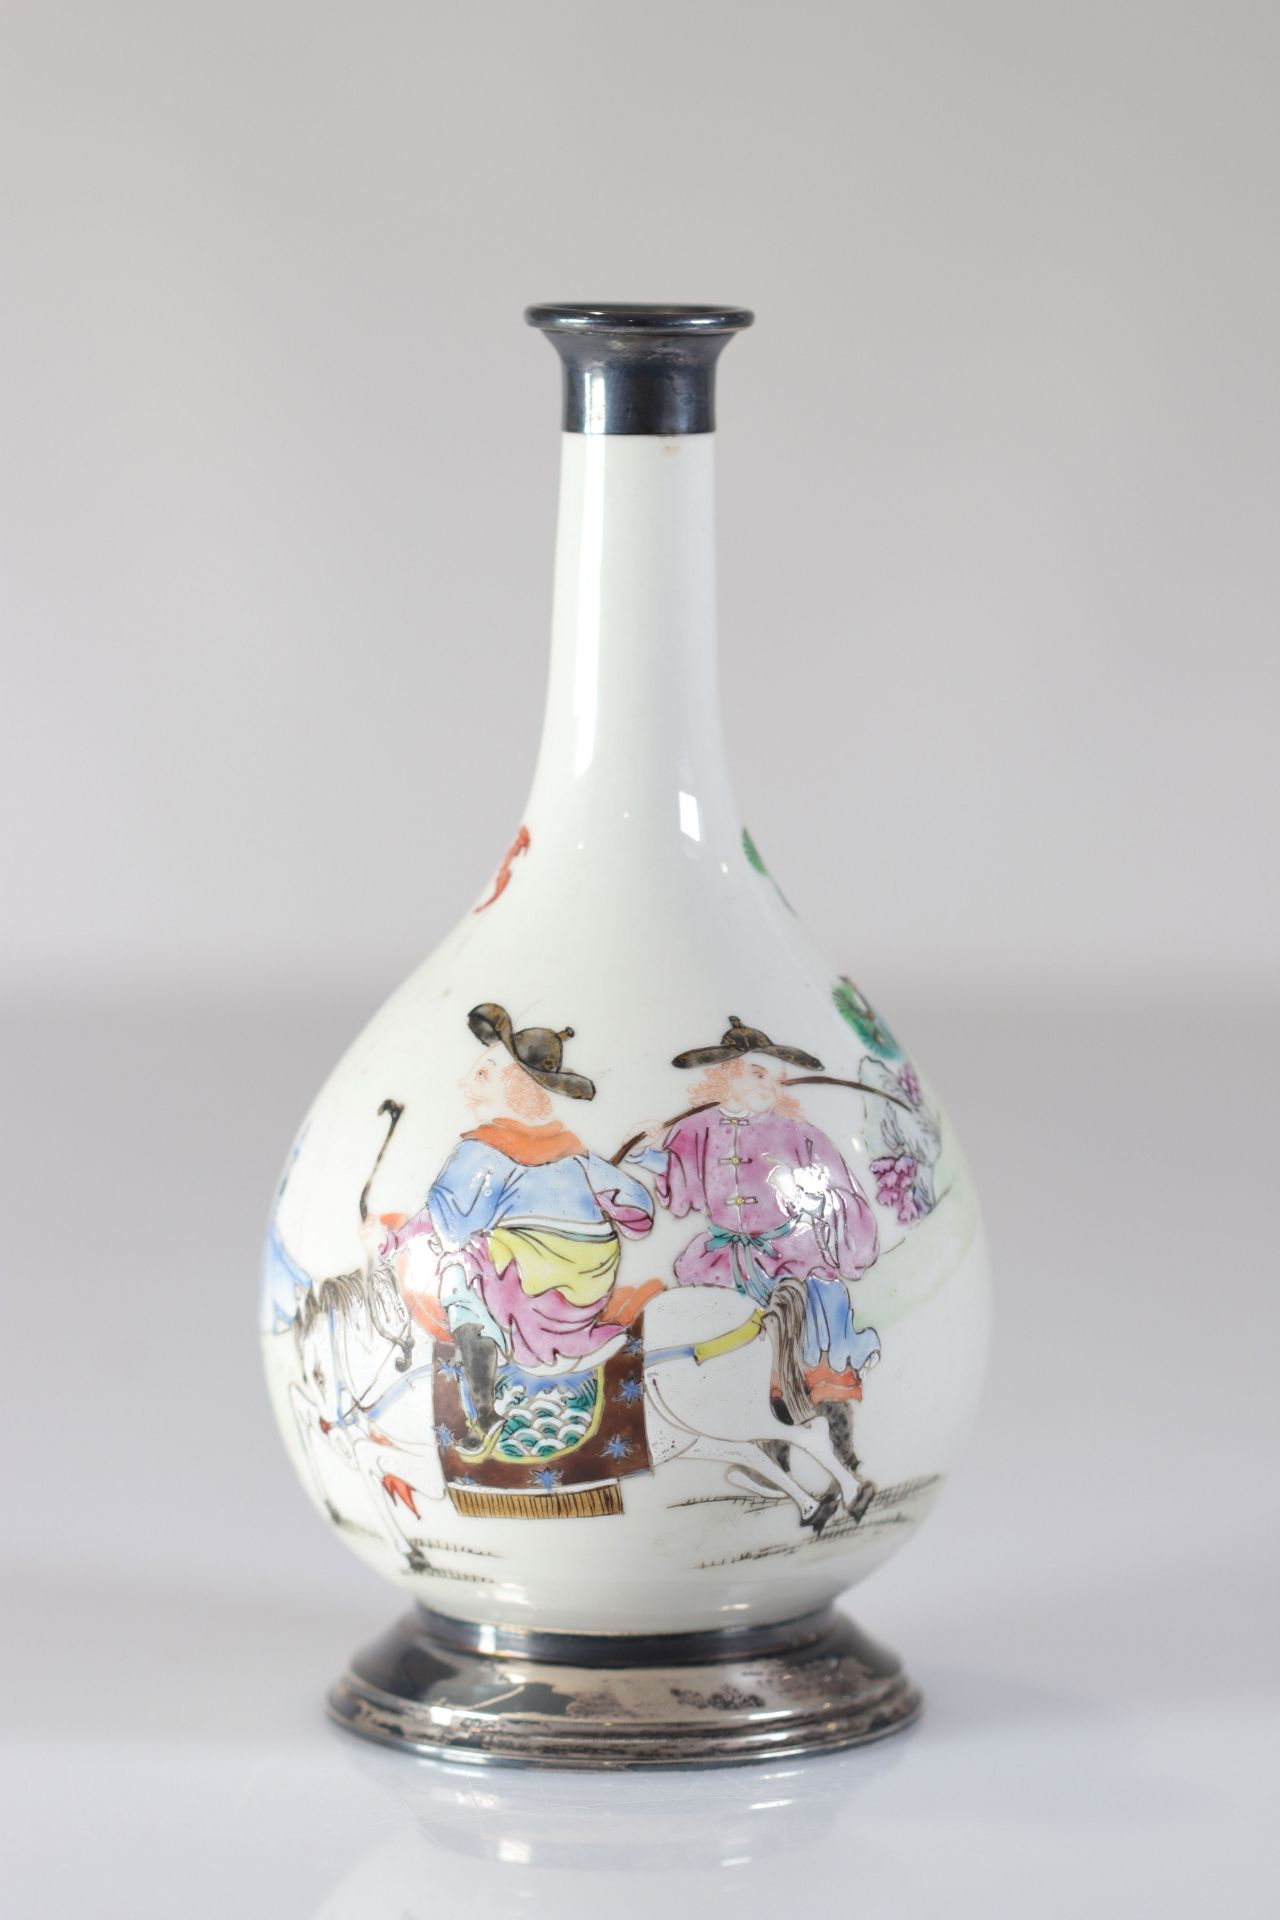 Famille rose porcelain vase decorated with a rider "foot mounted on silver"